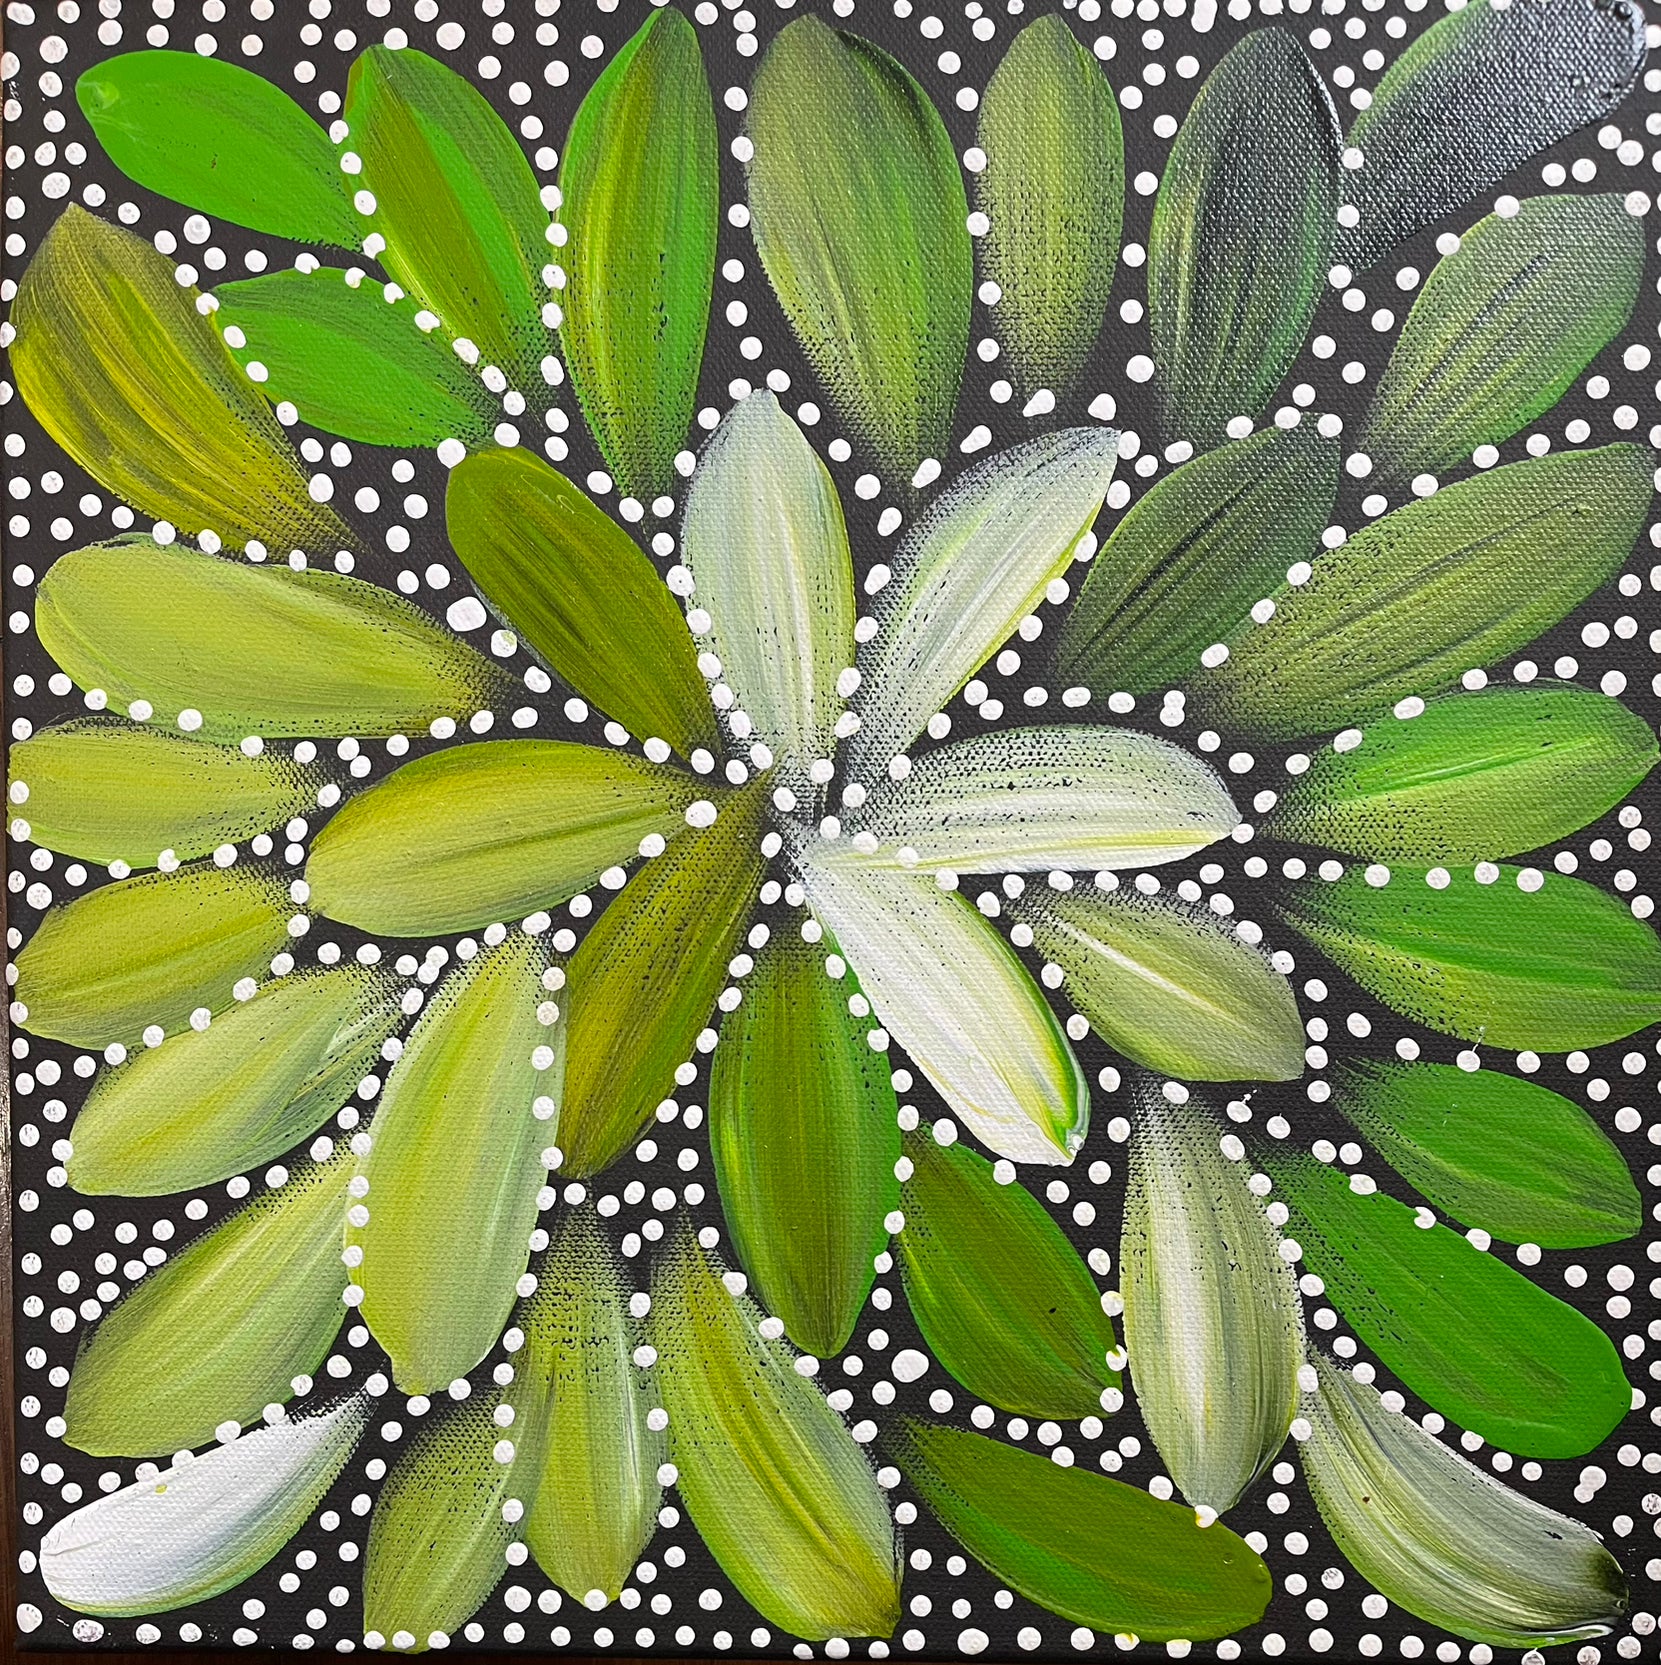 Louise Numina - Bush Medicine Leaves - 30x30cm .32-12 Stretched Ready to Hang